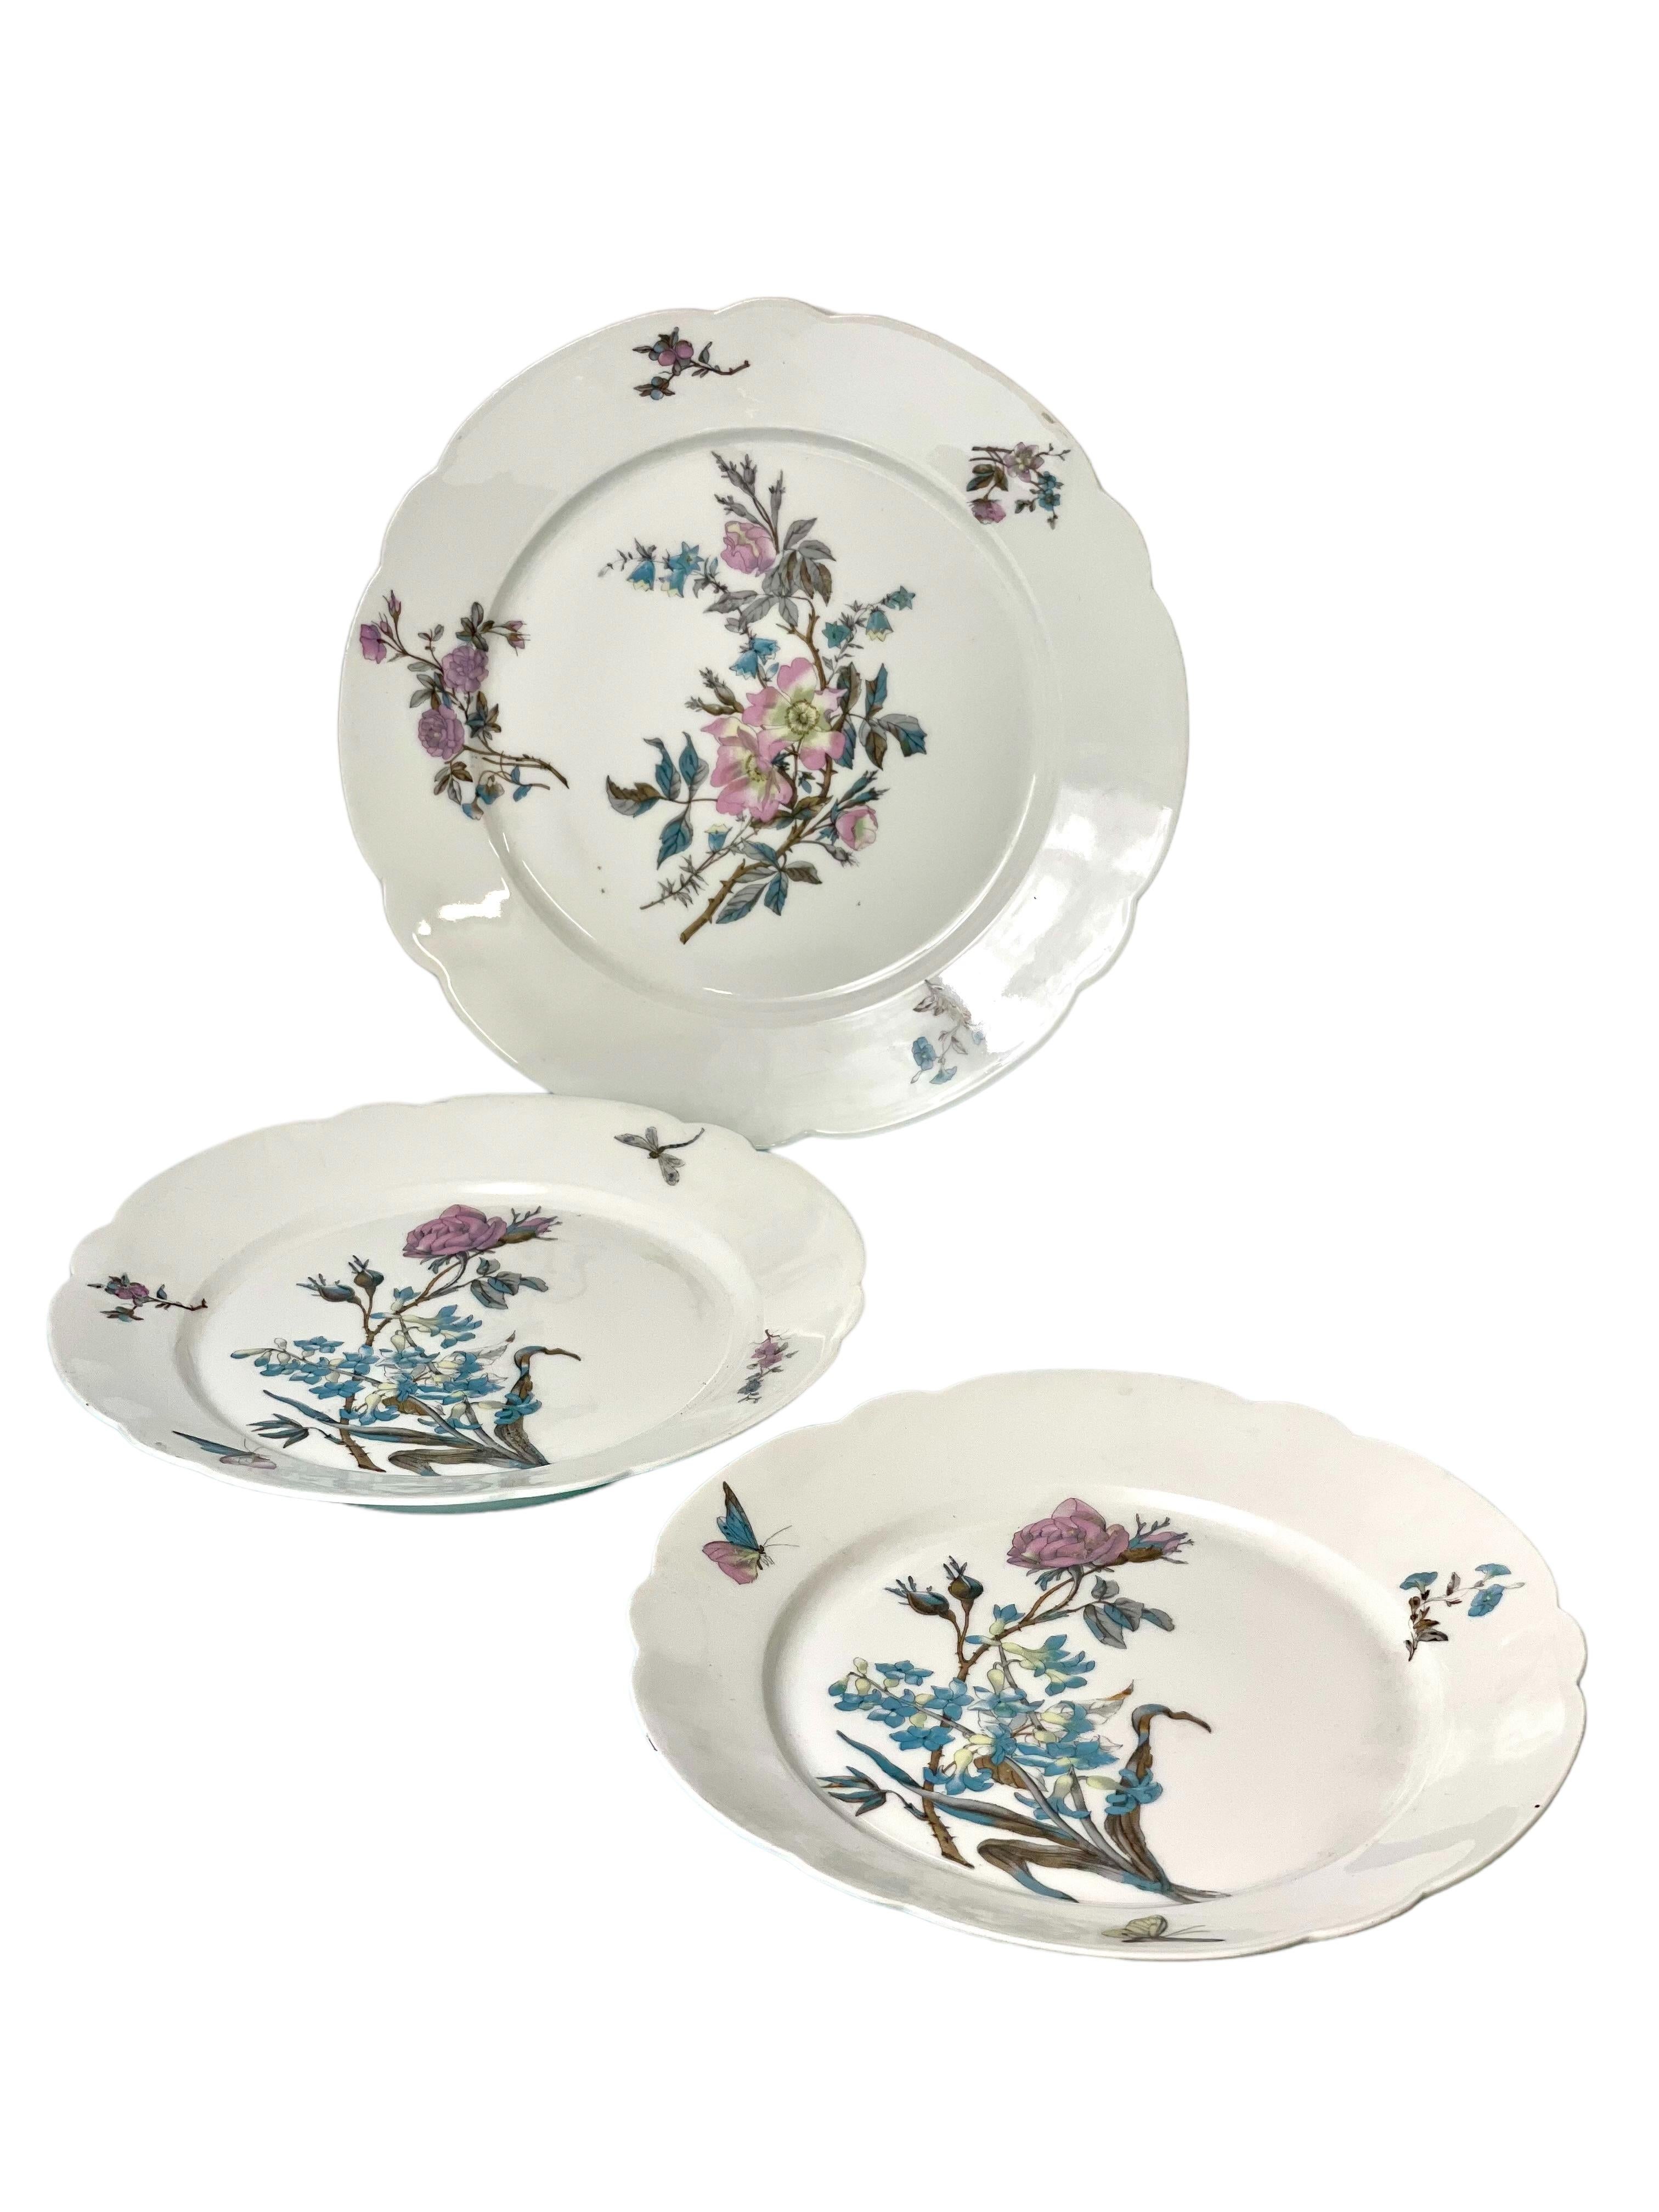 102-Piece Porcelain Dinner Service with Flowers and Butterflies 9